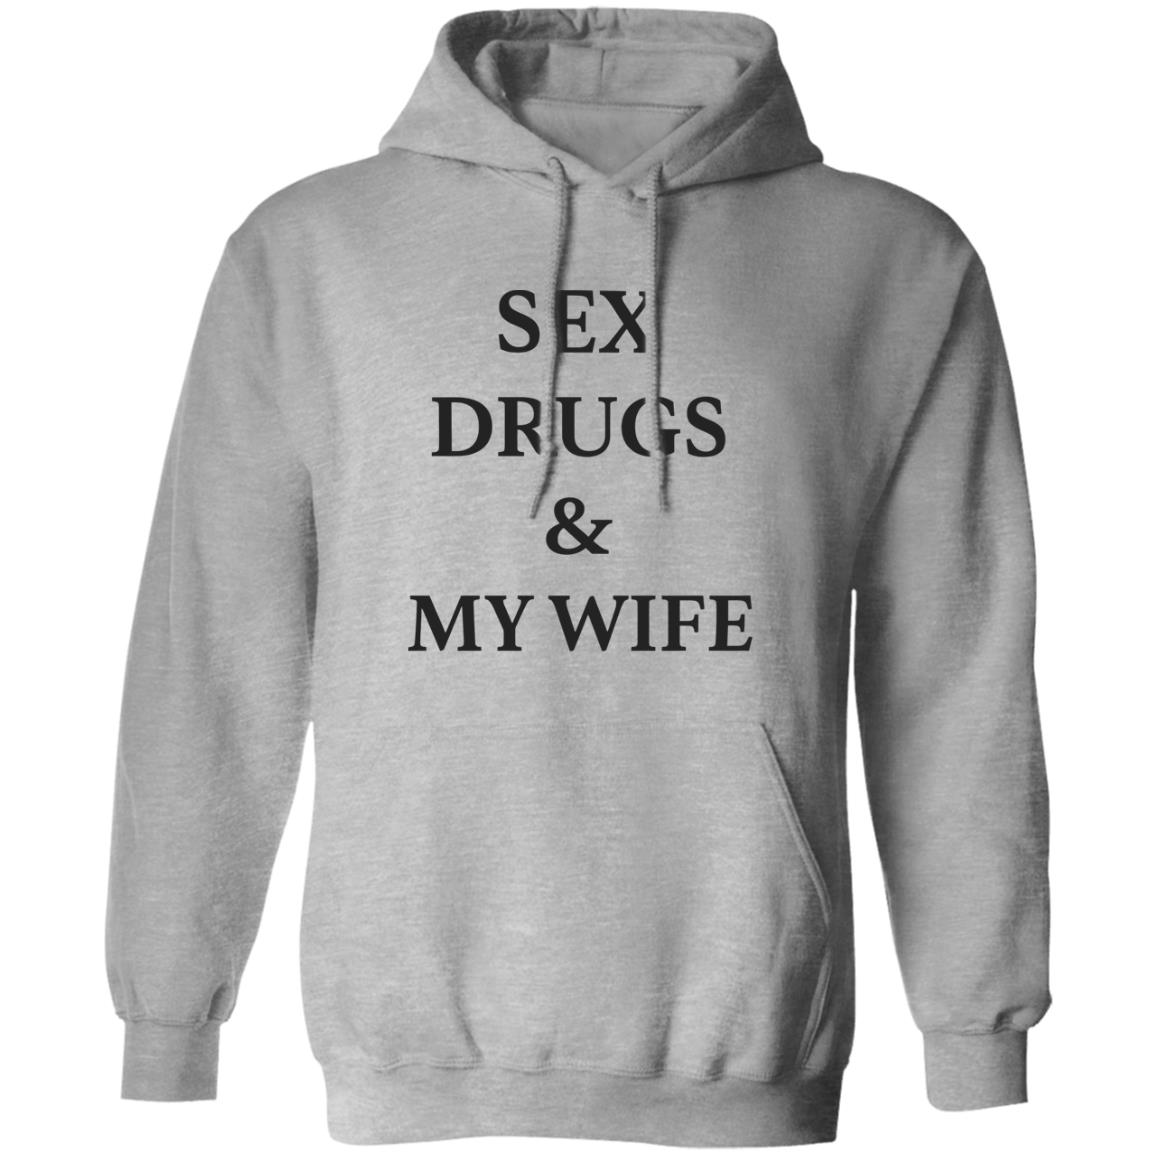 Sex Drugs And My Wife Shirt image pic